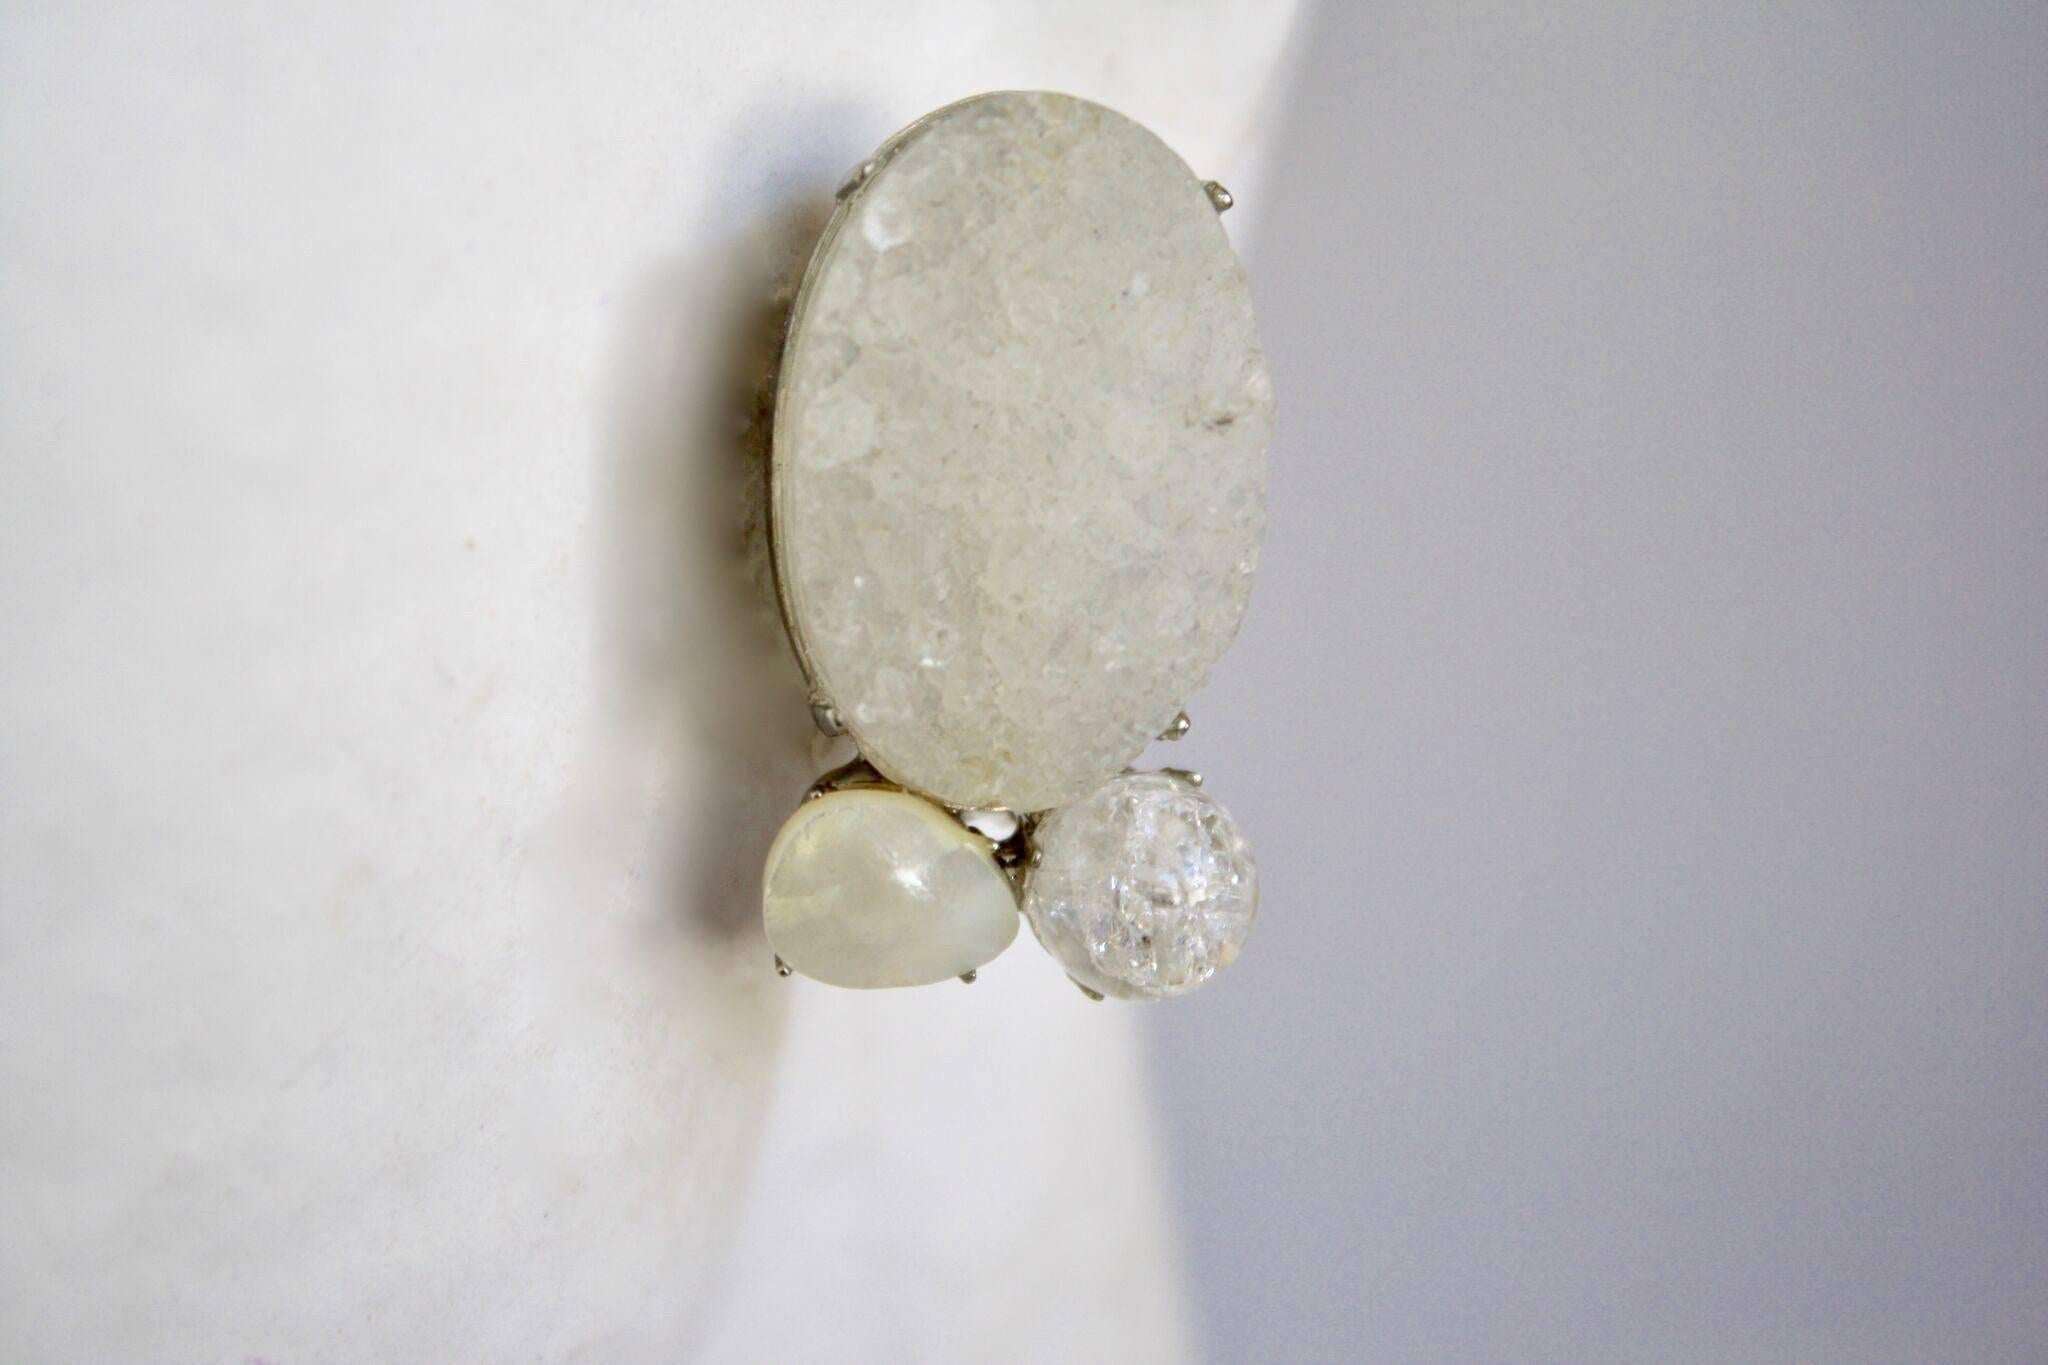 Vintage clip earrings from designer Siman Tu. Made with druzy, quartz, and mother of pearl. 

1.5" long 
.75" wide